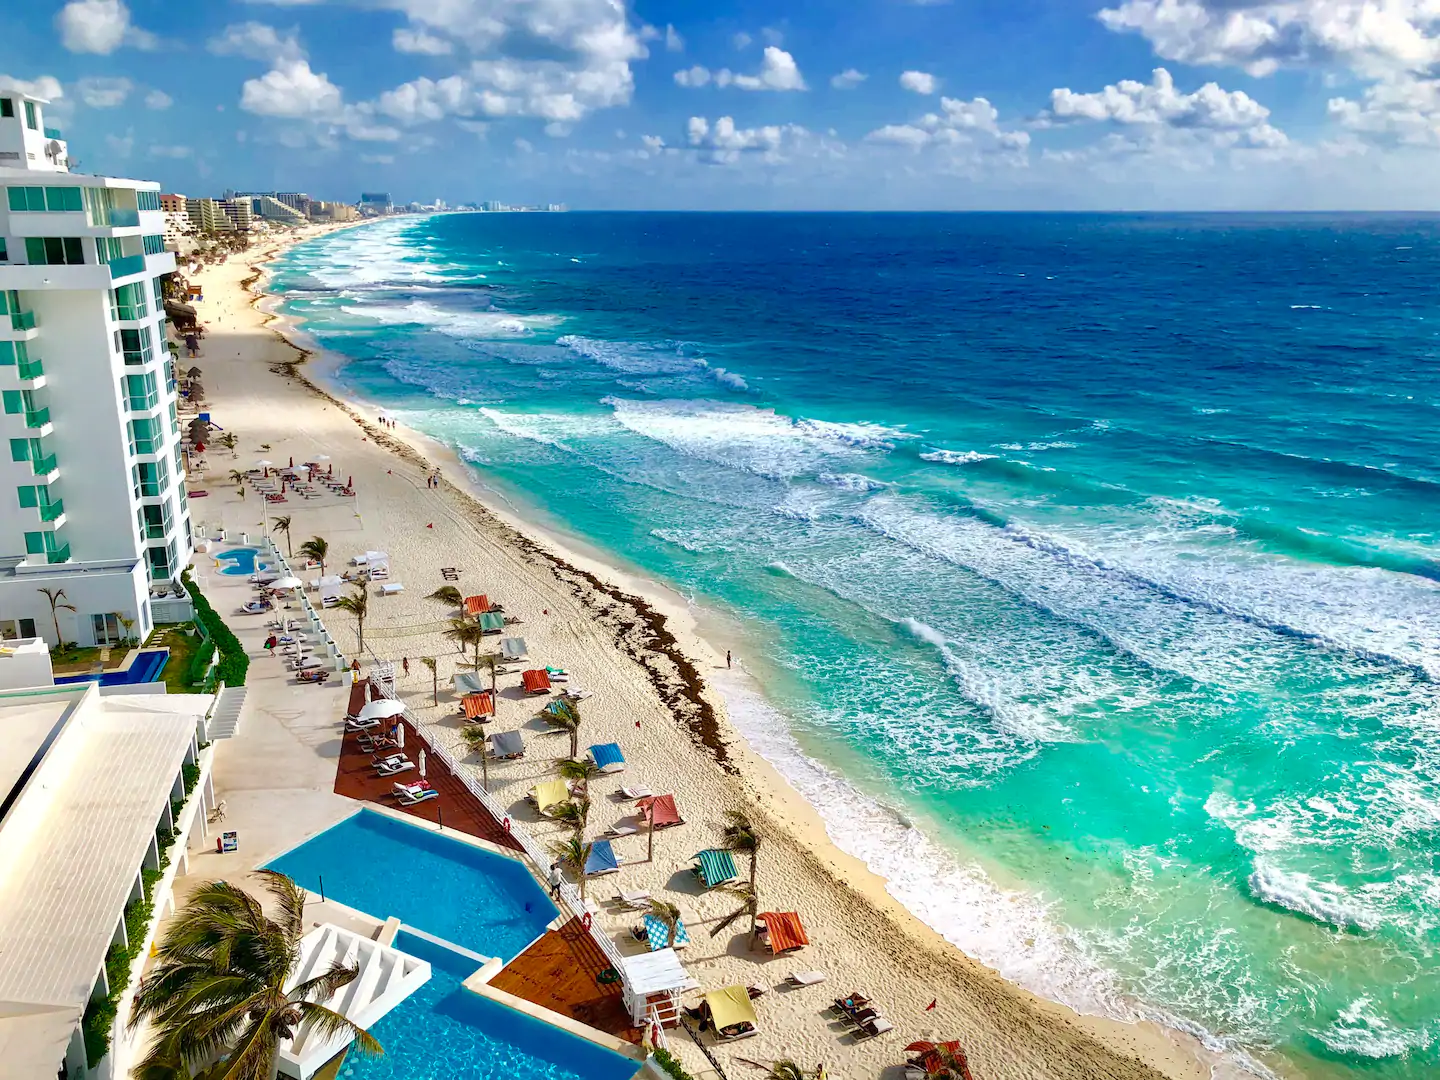 You need to book this amazing Airbnb in Cancun, Mexico!